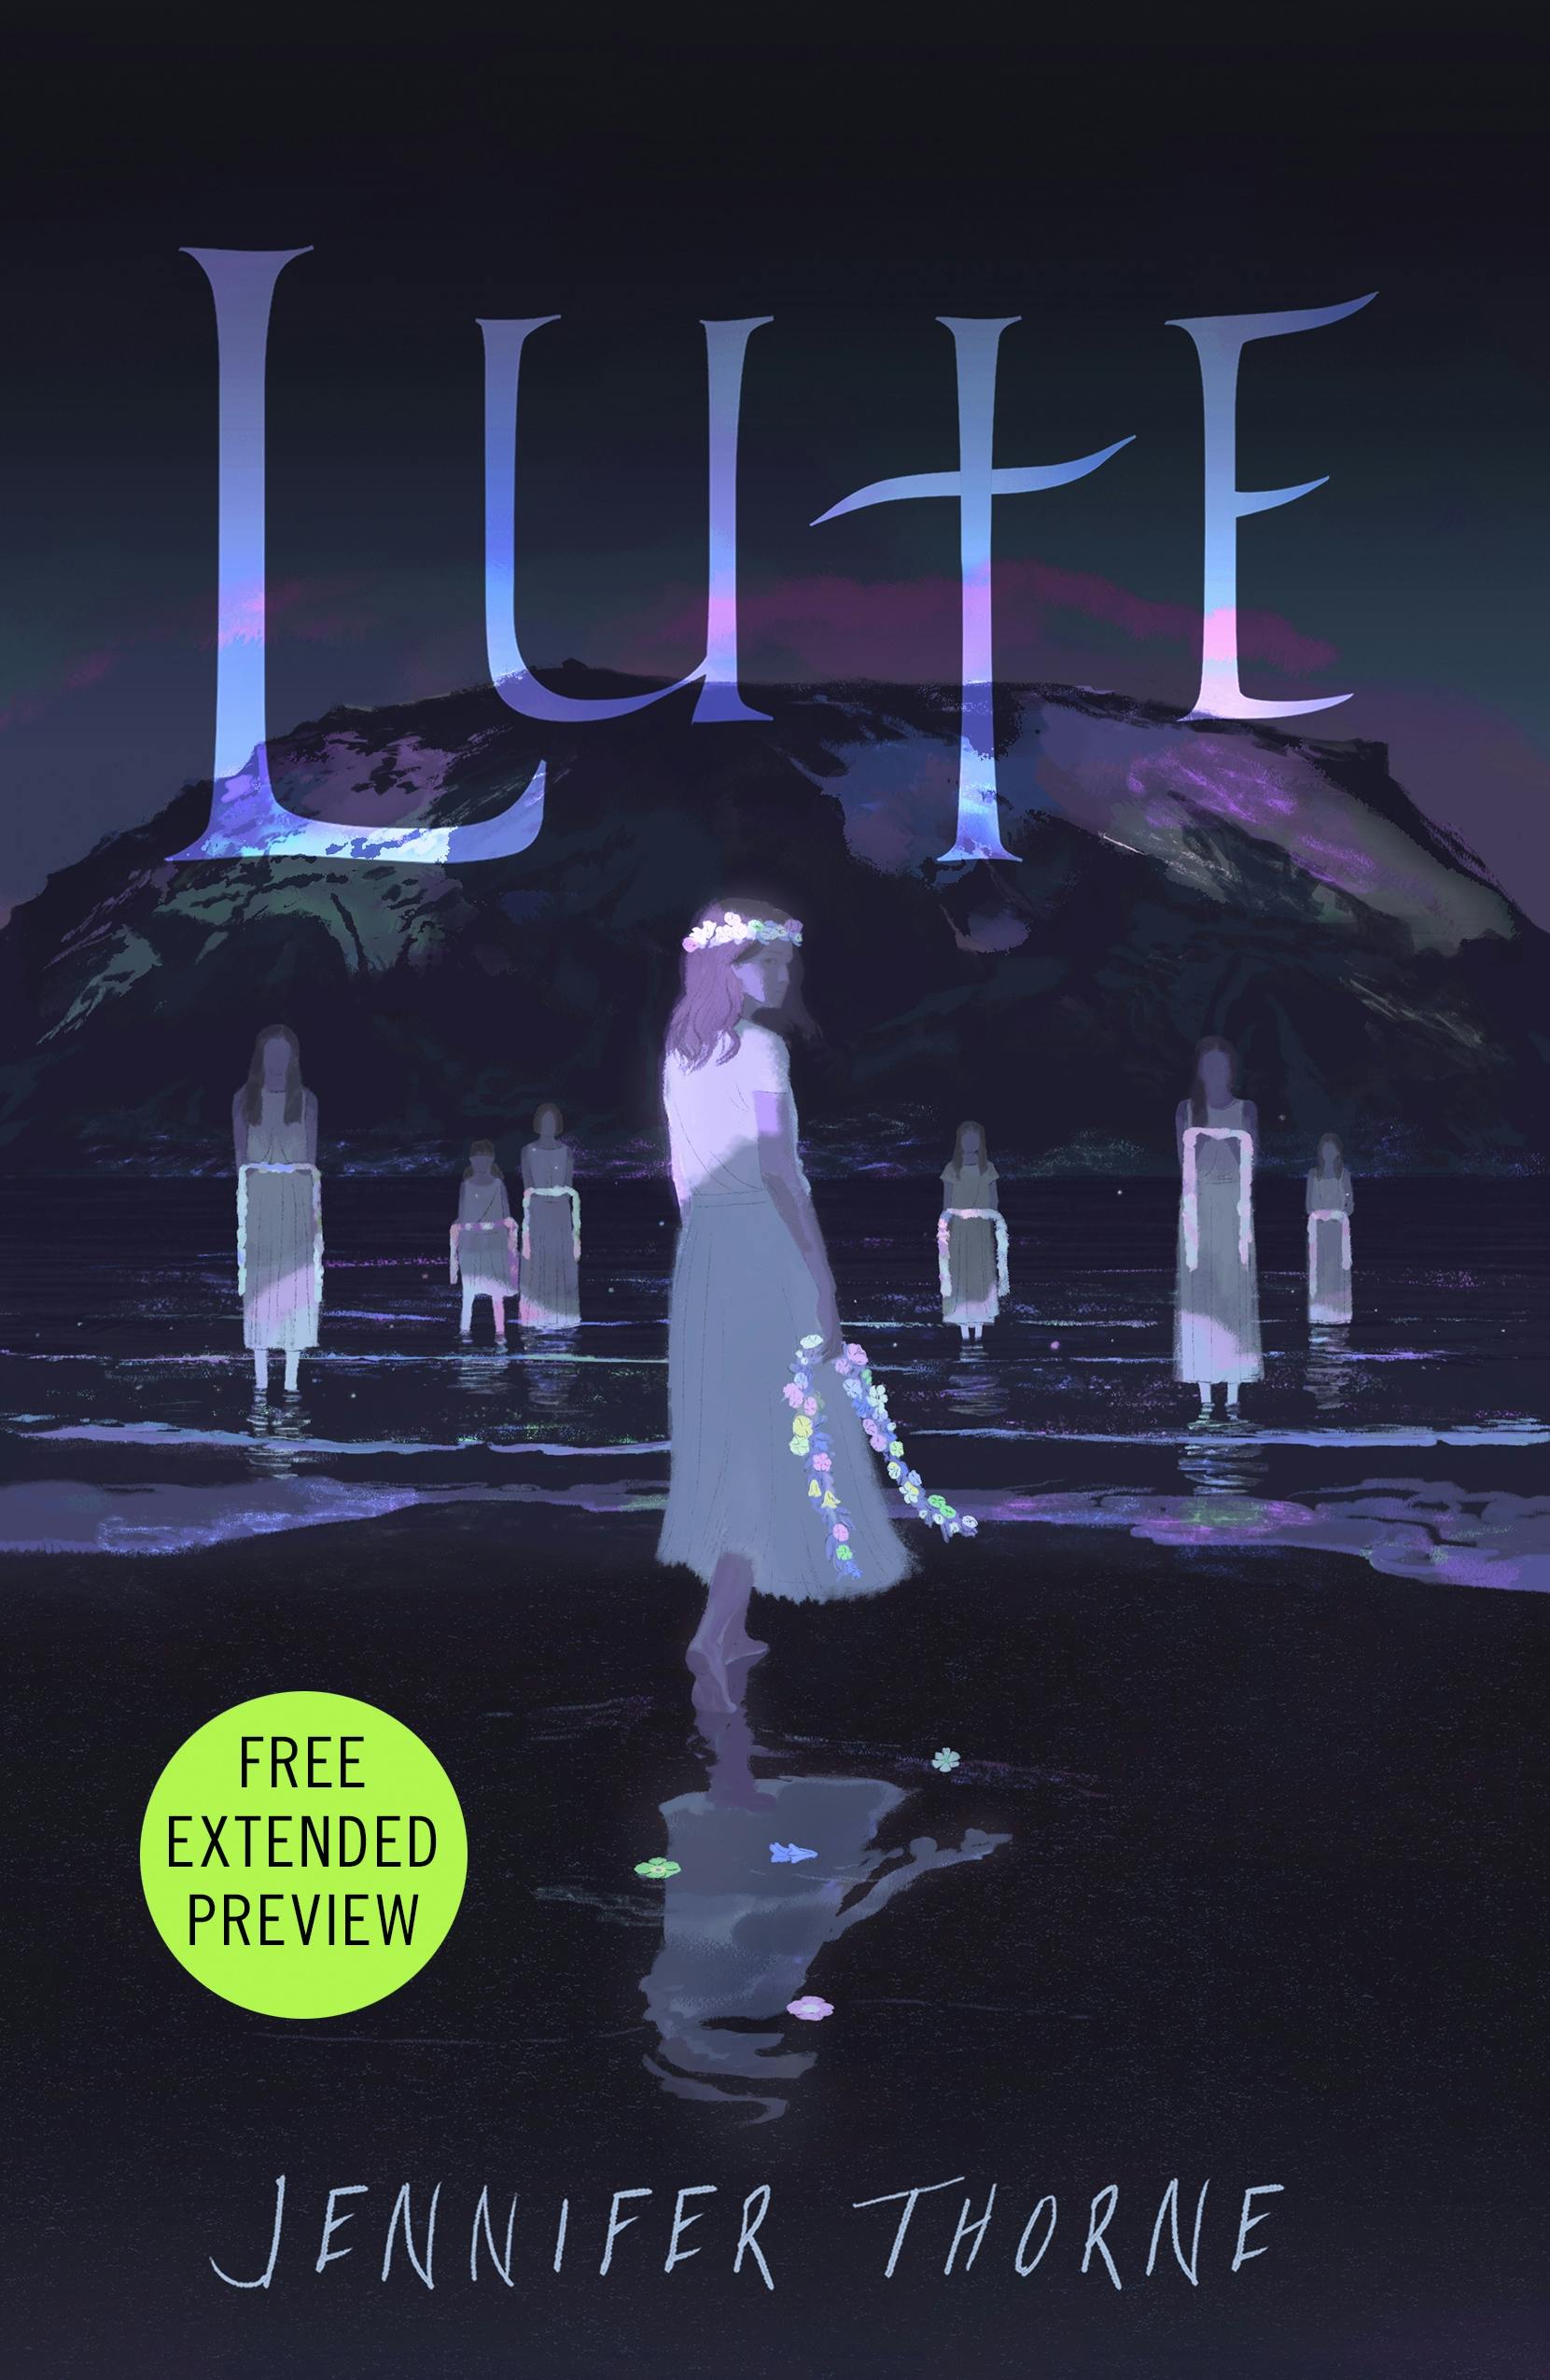 Cover for the book titled as: Lute Sneak Peek